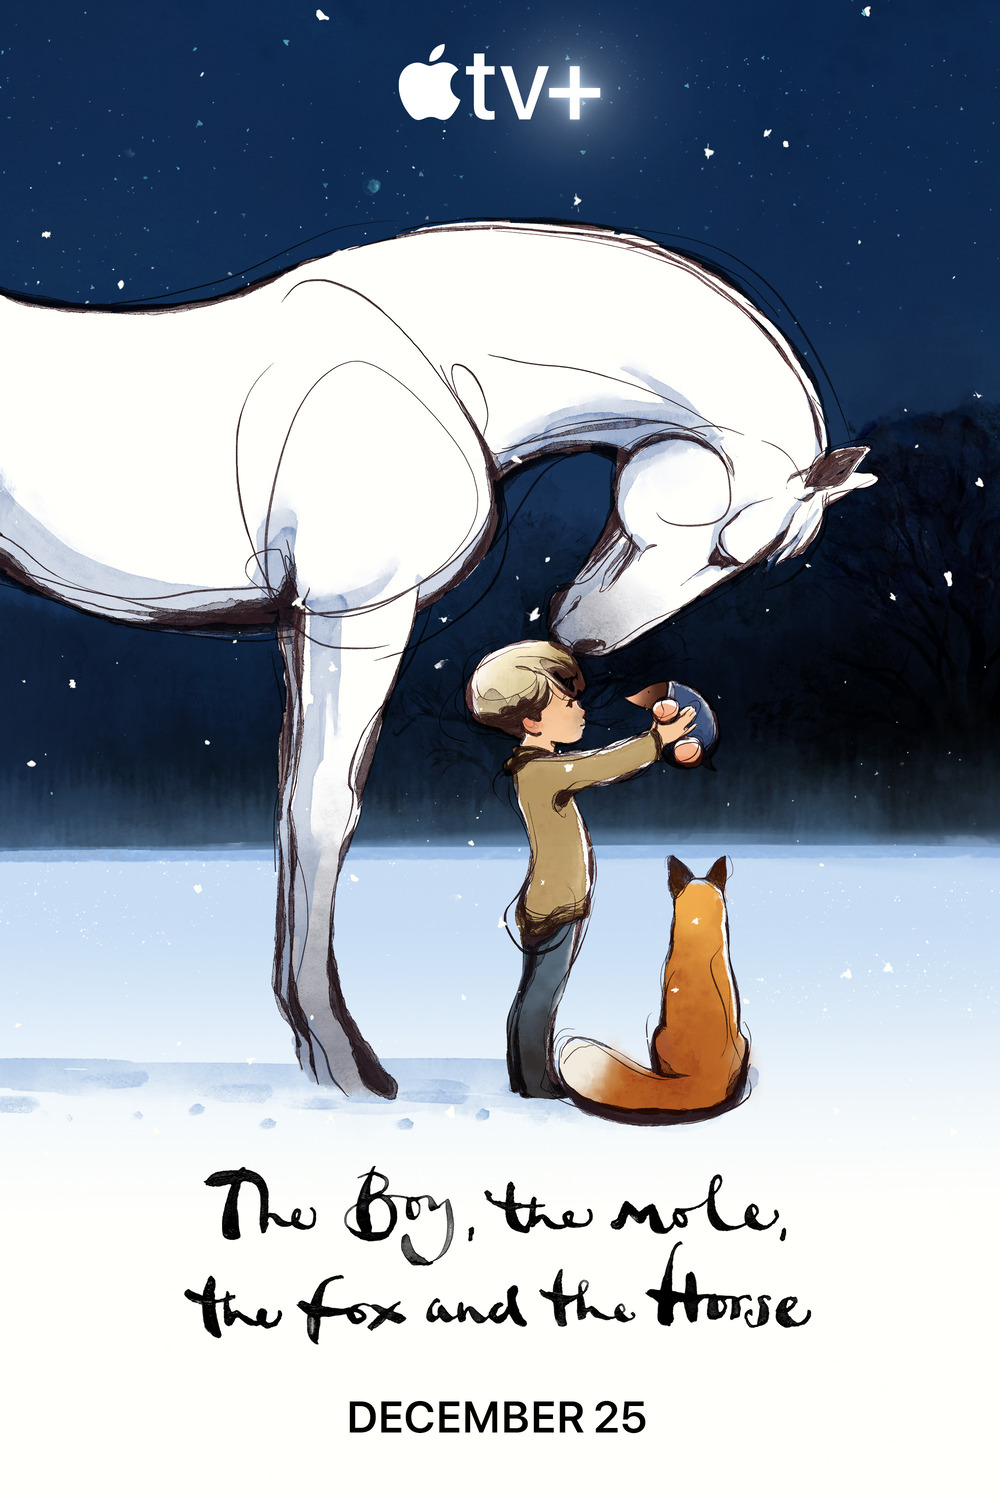 Extra Large Movie Poster Image for The Boy, the Mole, the Fox and the Horse 